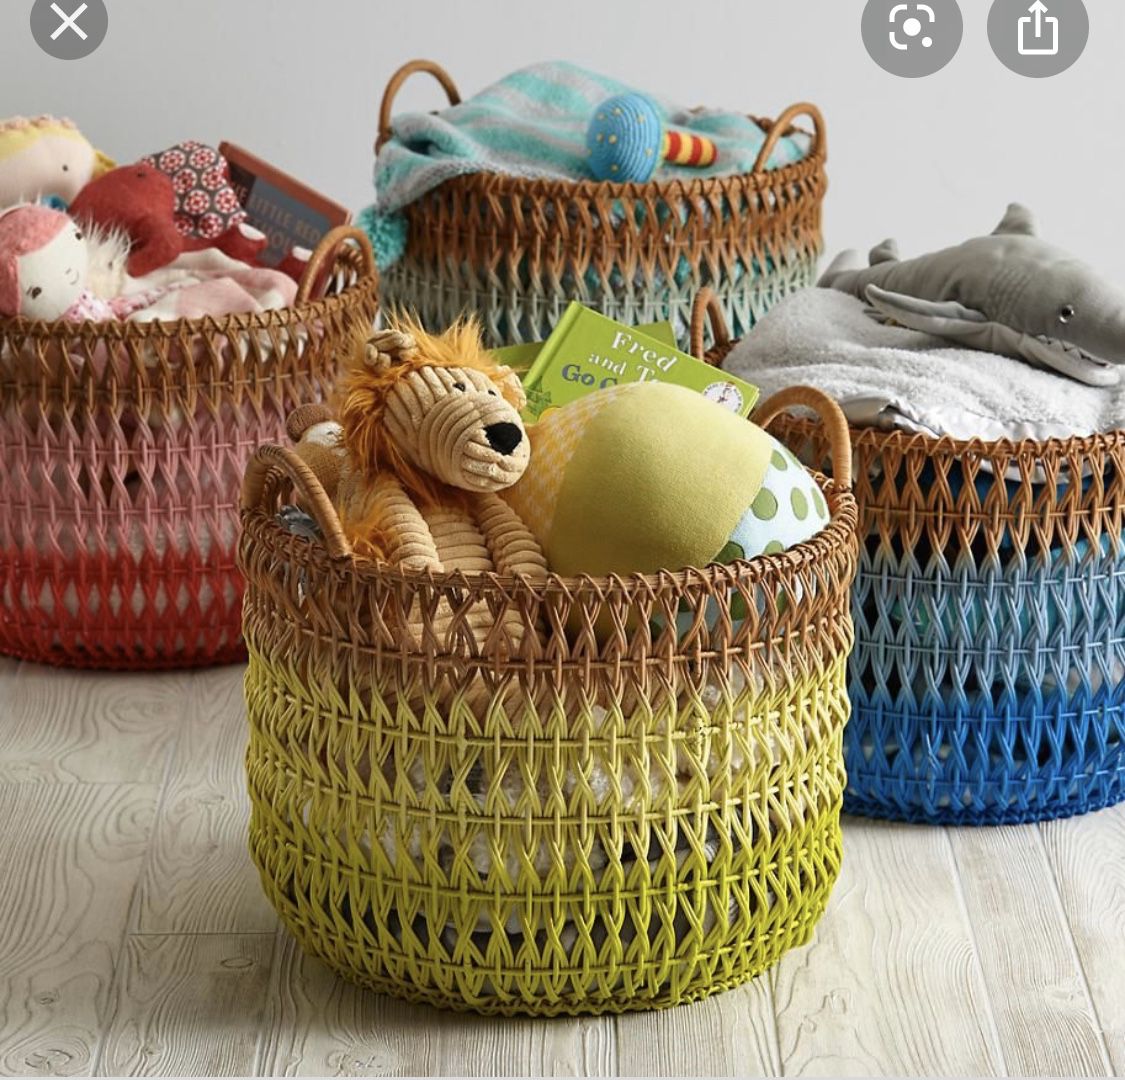 Crate and Barrel Large Ombre Rattan Basket